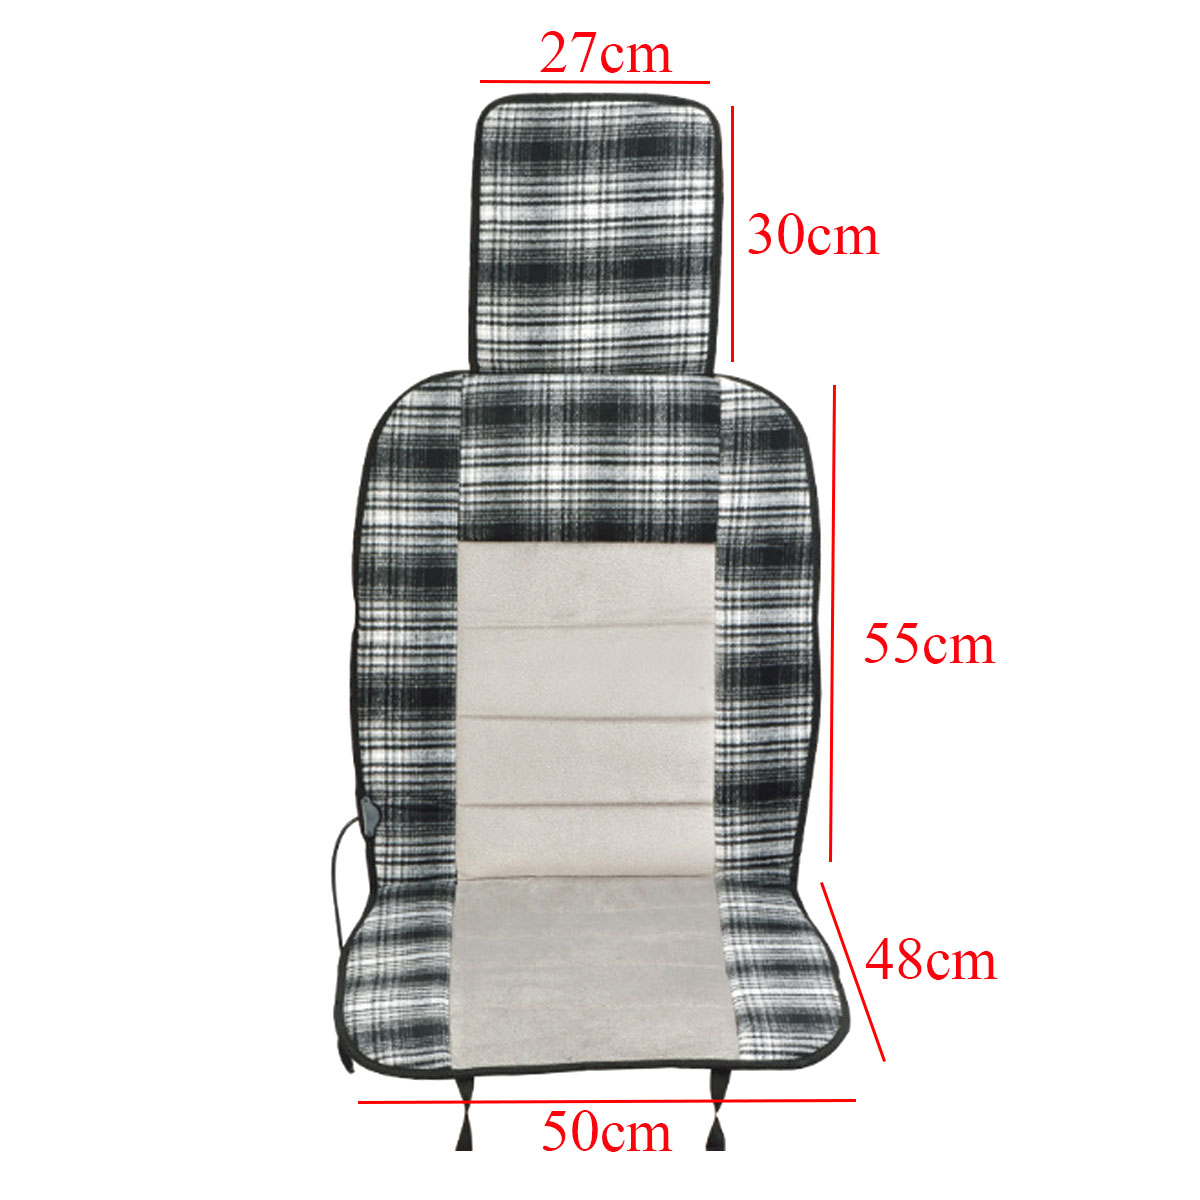 12V Universal Electric Heated Car Seat Cushion Cover Padded Thermal Warmer Mat